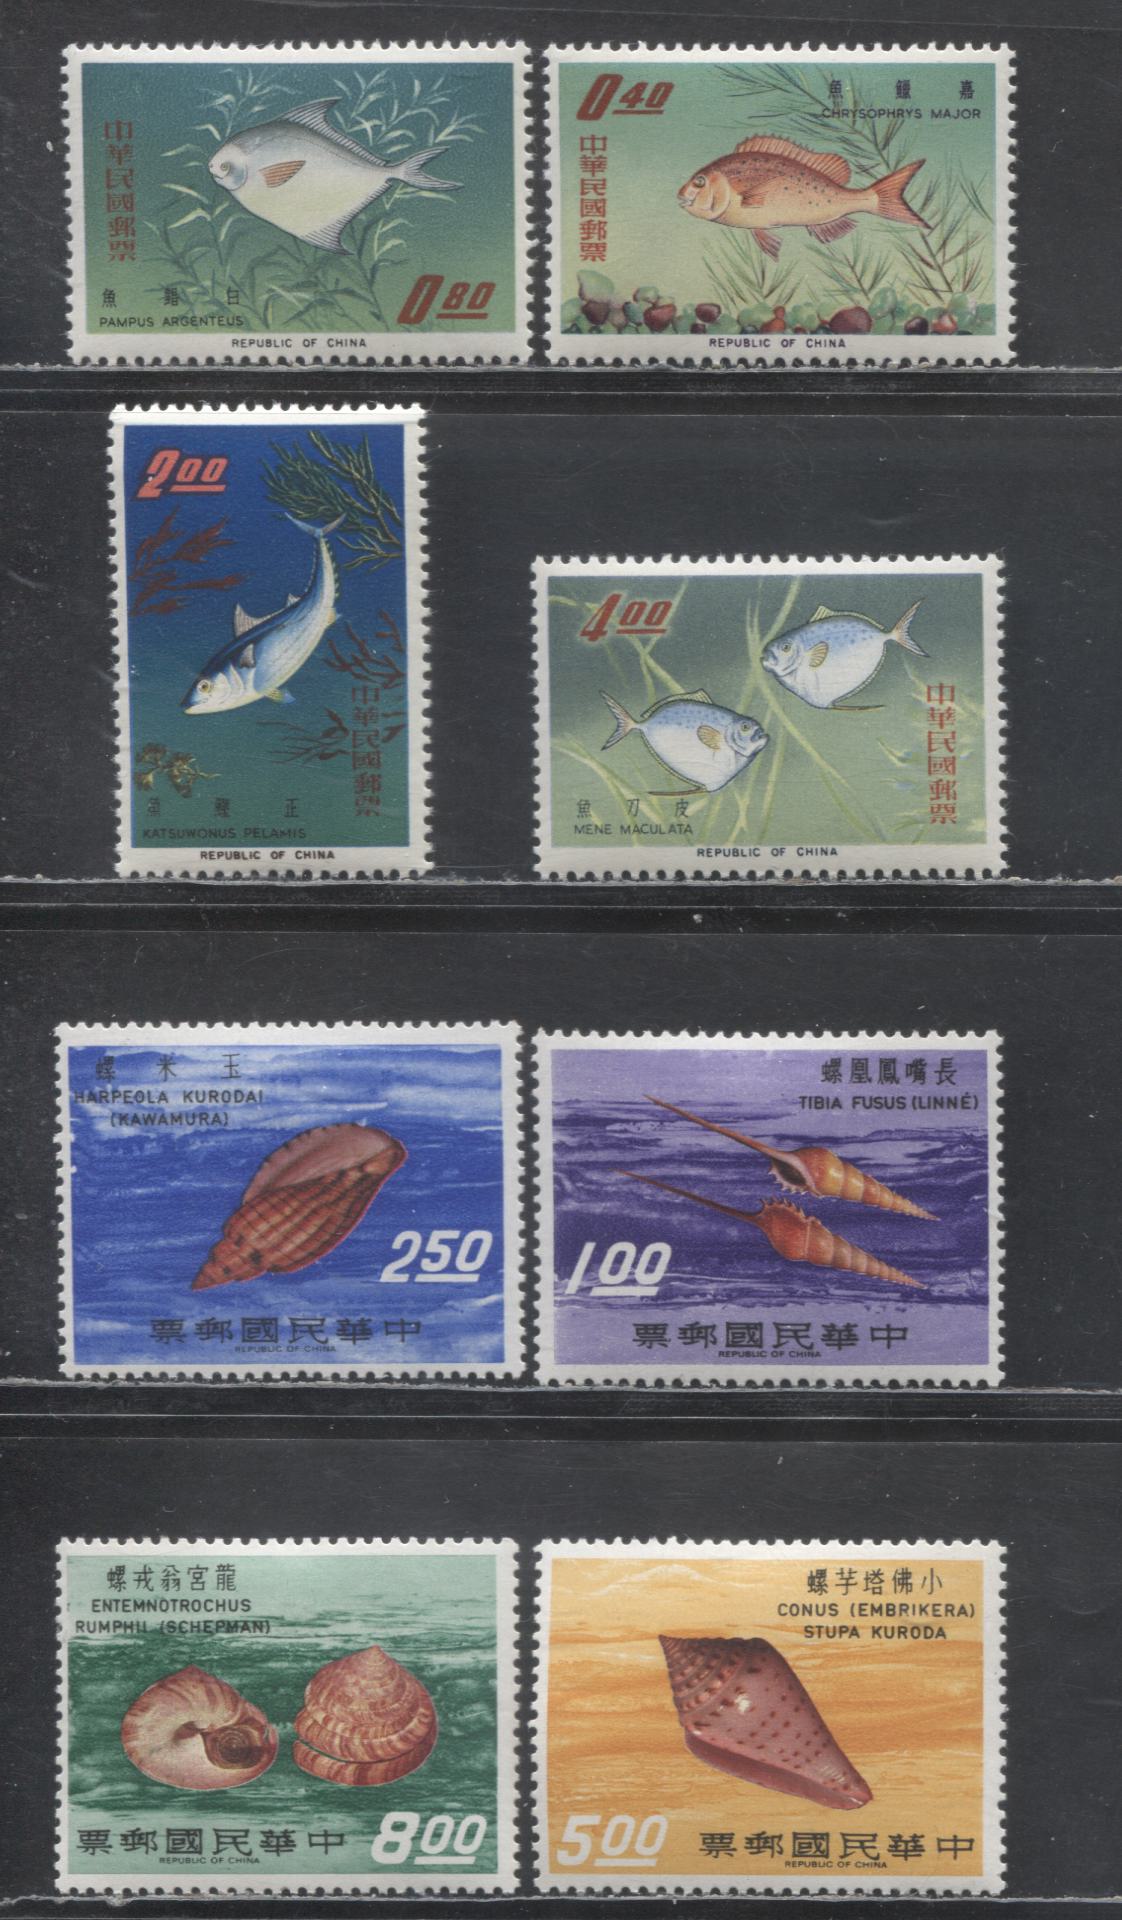 Lot 160 China SC#1454-1457 1965-1971 Fisherman's Day - Shells Issues, 8 VFNH & OG Singles, Click on Listing to See ALL Pictures, Estimated Value $31